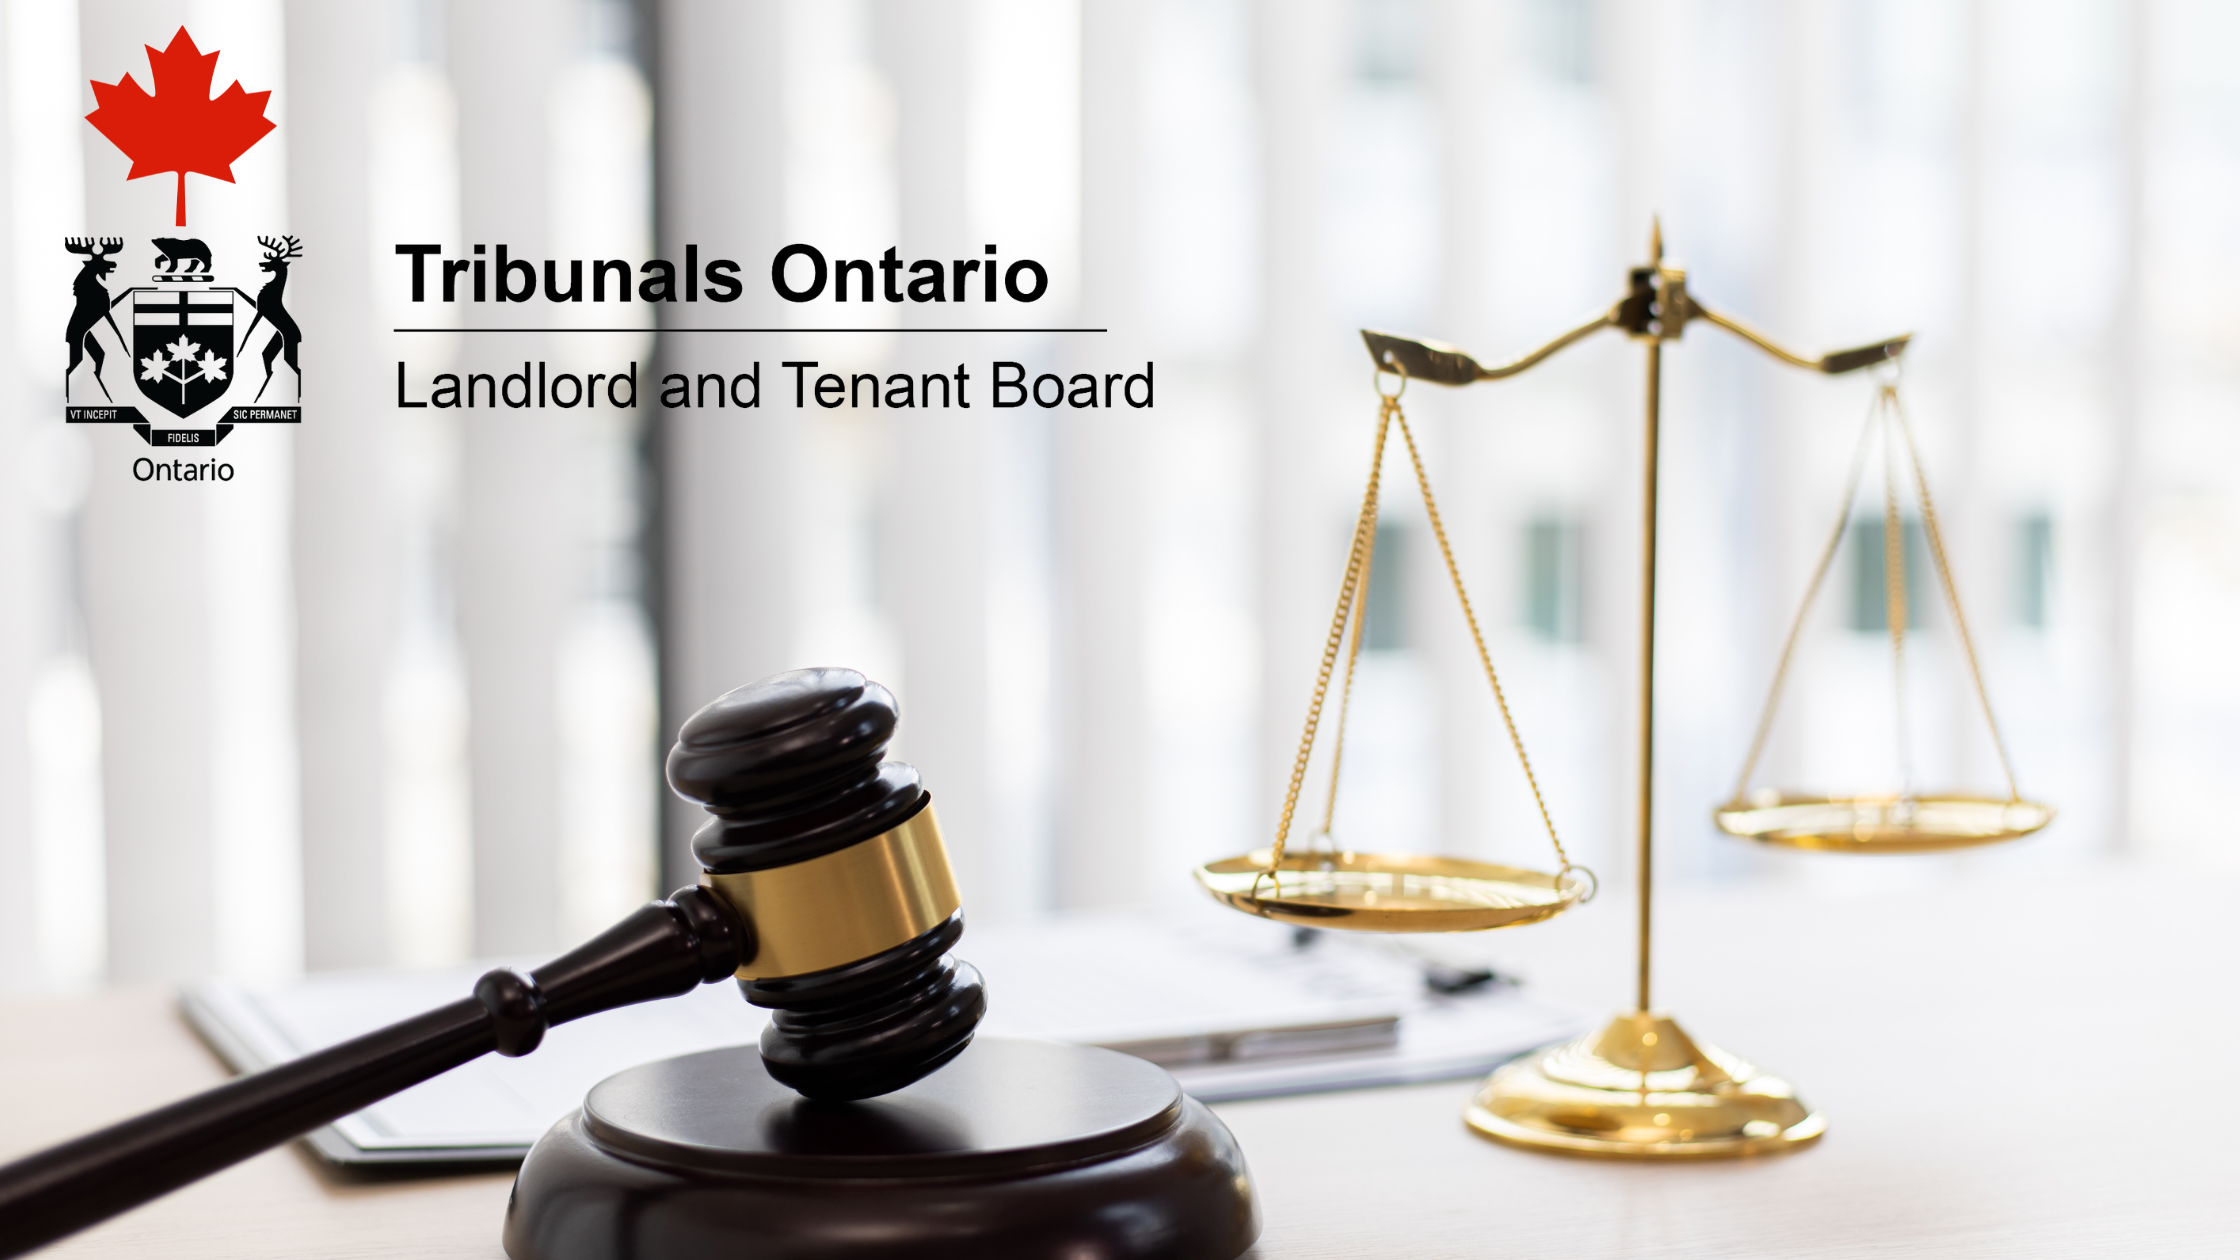 Hire a Landlord And Tenant Toronto Paralegal